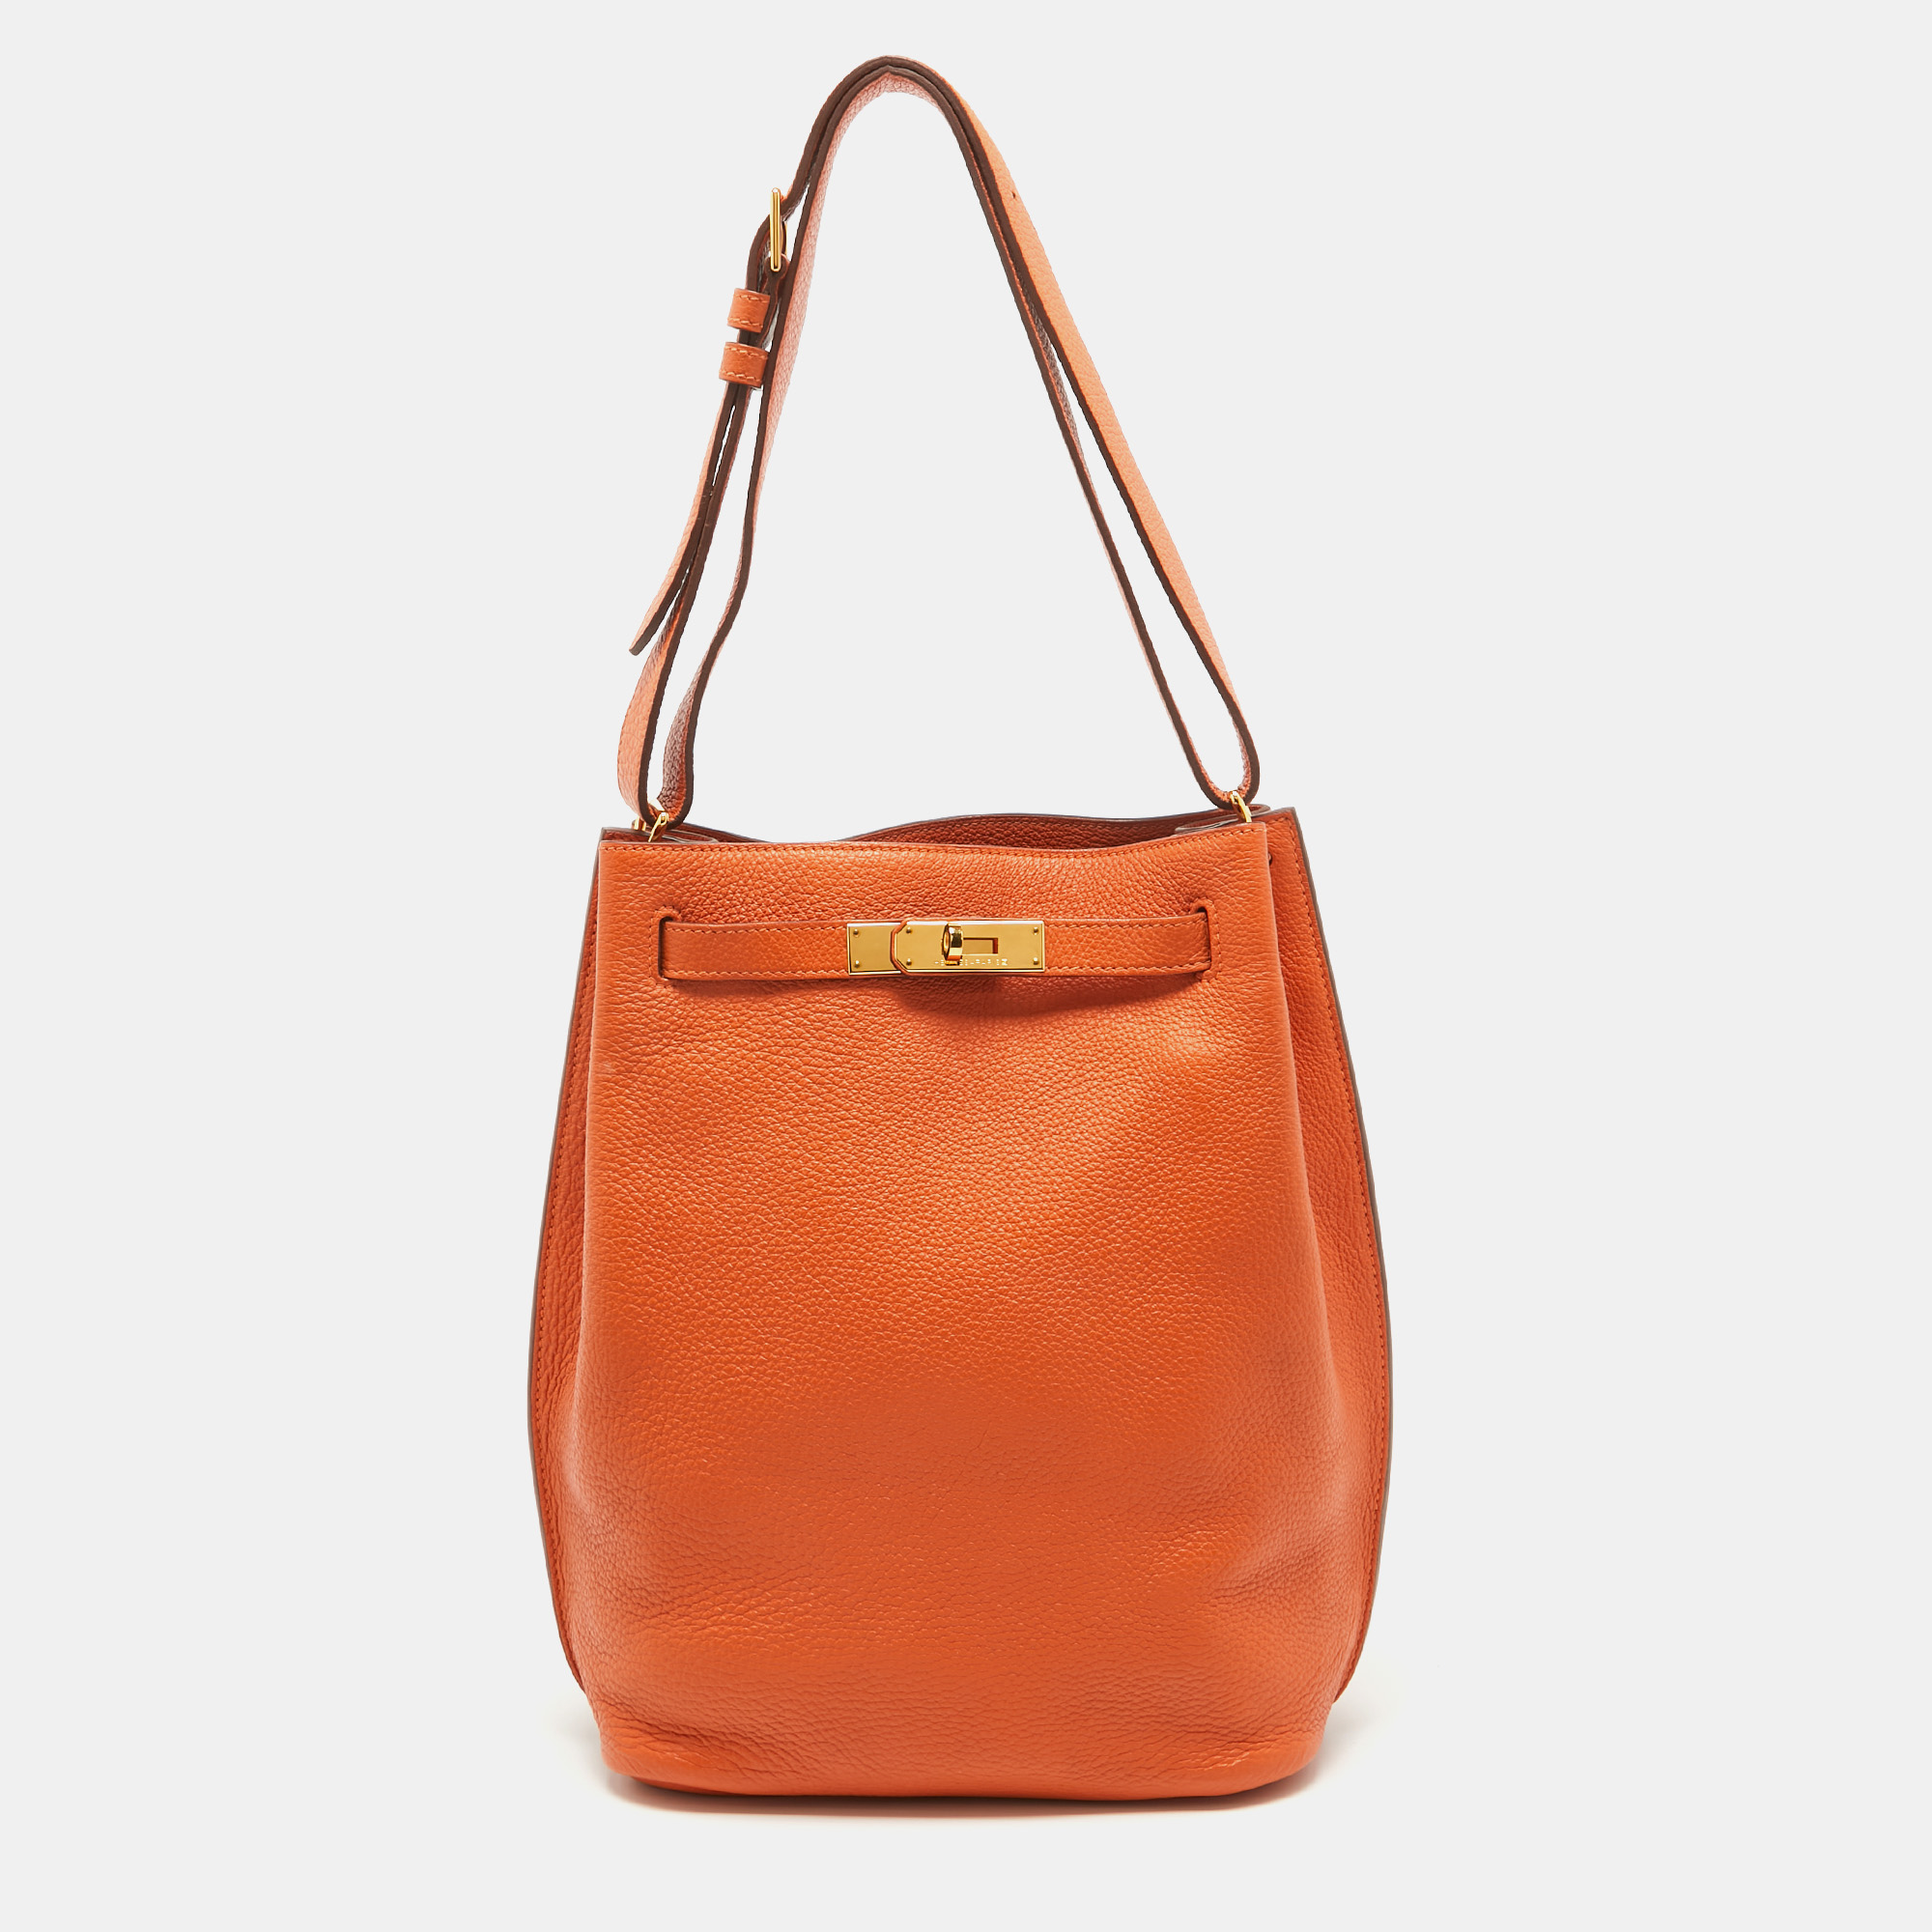 The elegant and timeless elements of the iconic Kelly are coupled with a more casual silhouette in this coveted So Kelly bag. It is crafted from Togo leather in a bucket like shape with the signature Kelly lock in gold tone metal on the front and an adjustable shoulder handle attached to the top. Its spacious interior is lined with leather and equipped with pockets for your little belongings. Complement your outfits with this stunner.